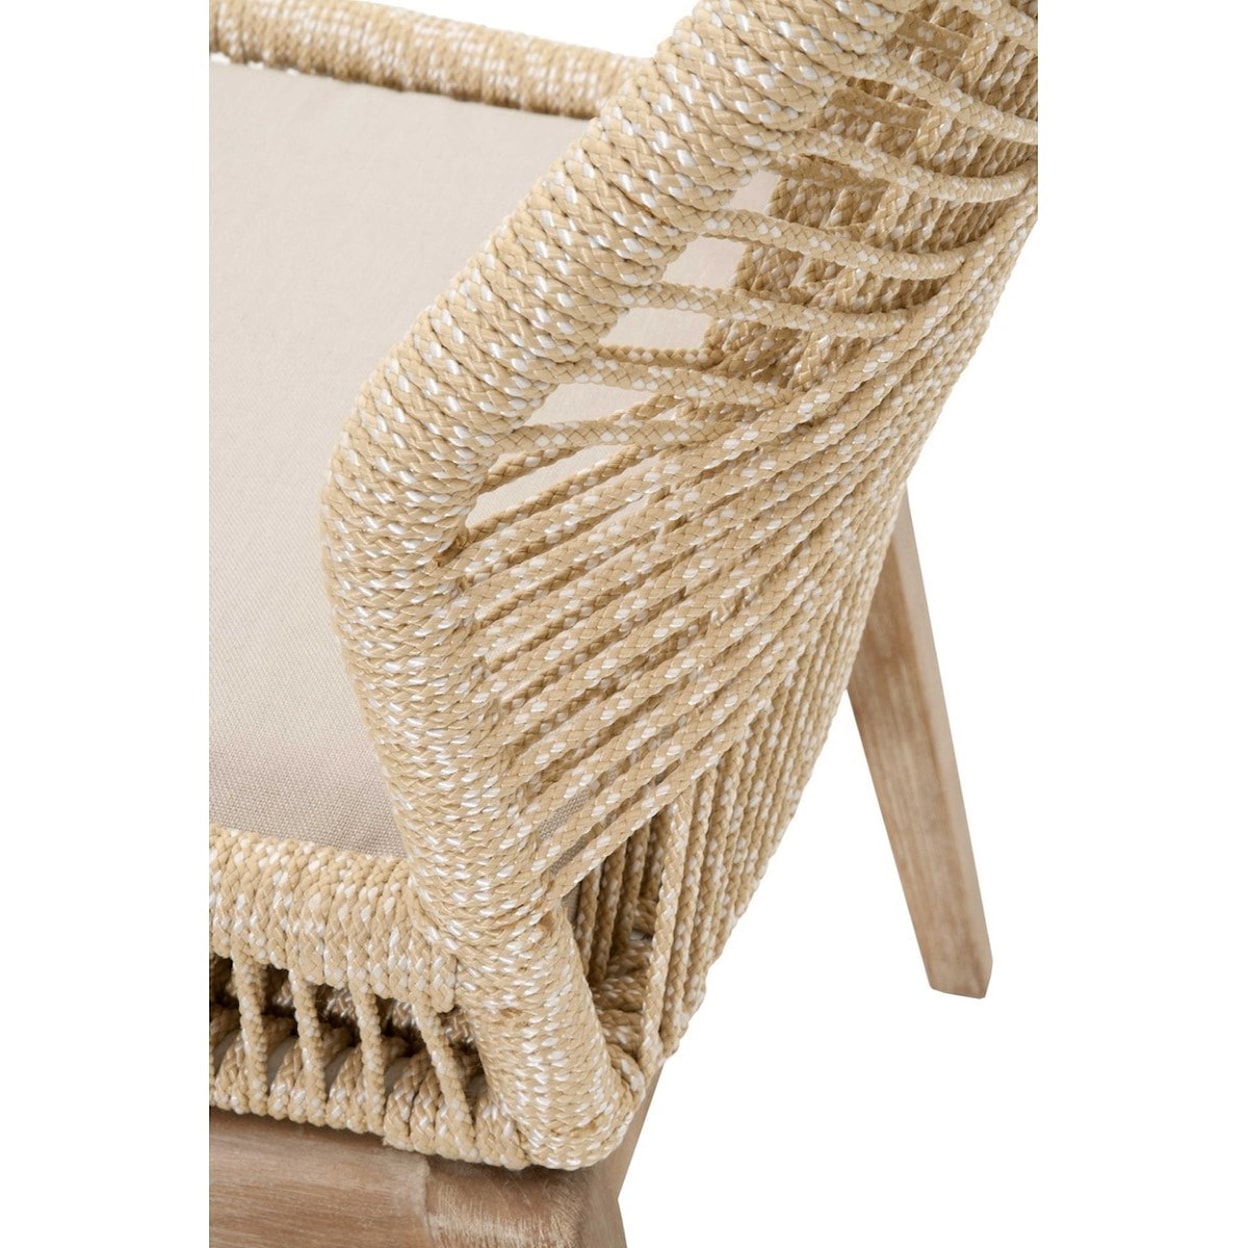 Essentials for Living Woven 6808KD.SND/LGRY Loom Woven Rope Dining ...